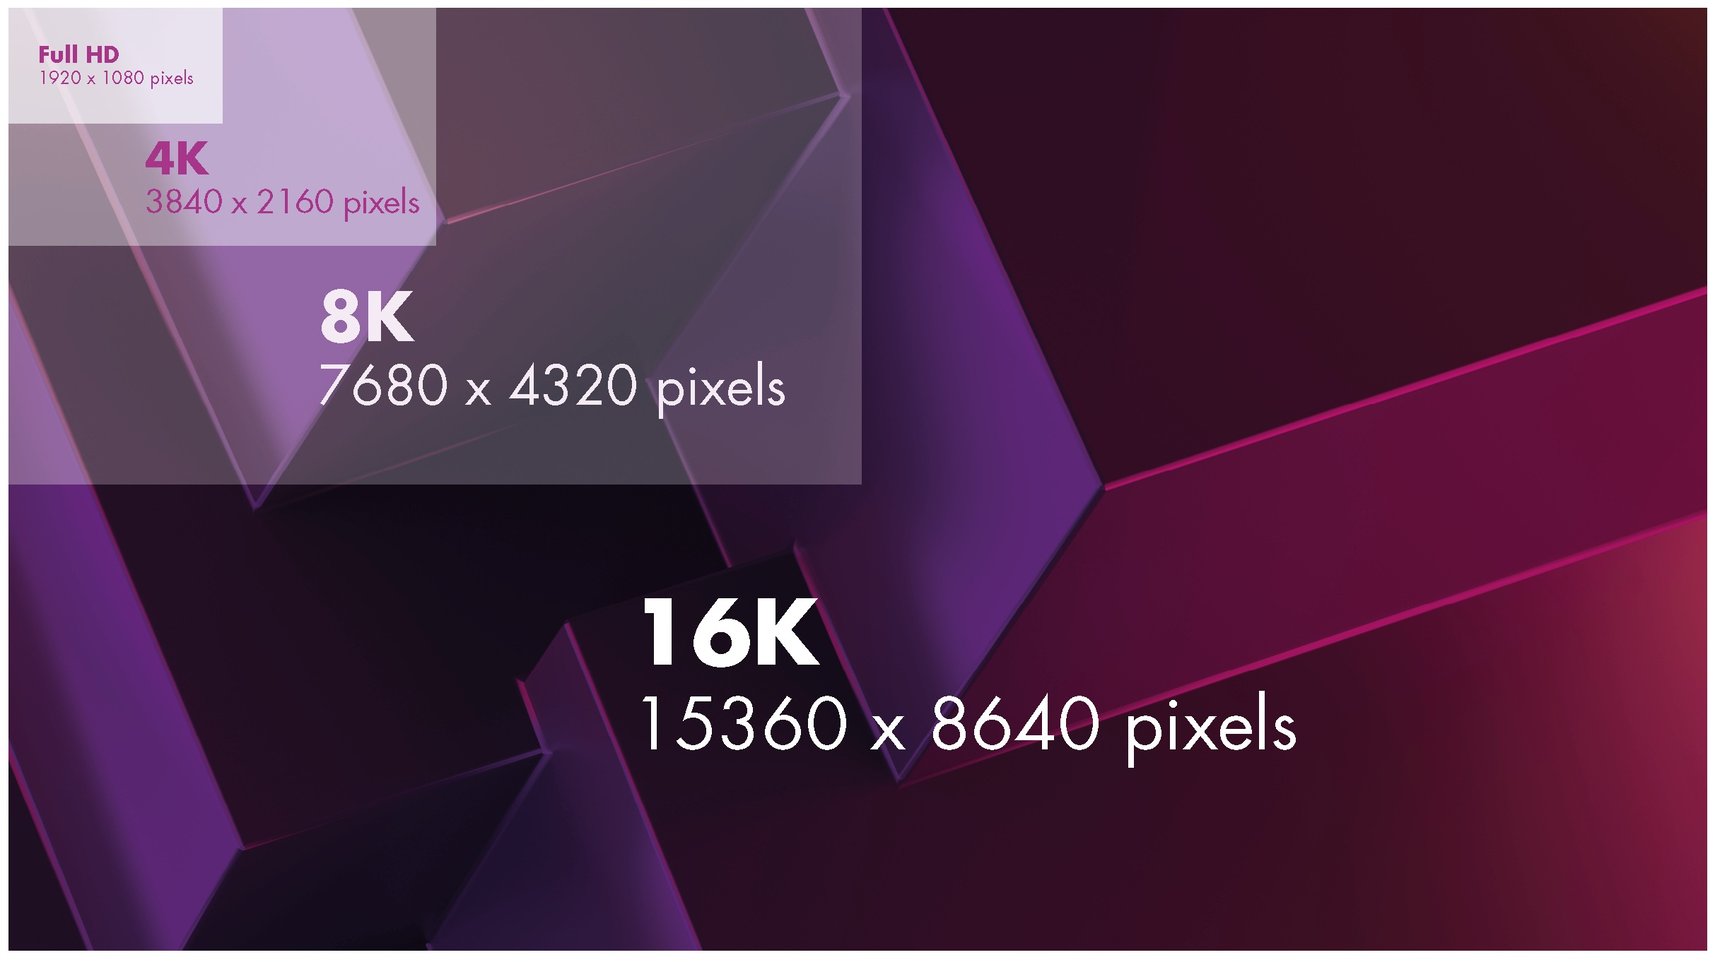 4k-8k-16k-the-race-for-higher-resolutions-is-on